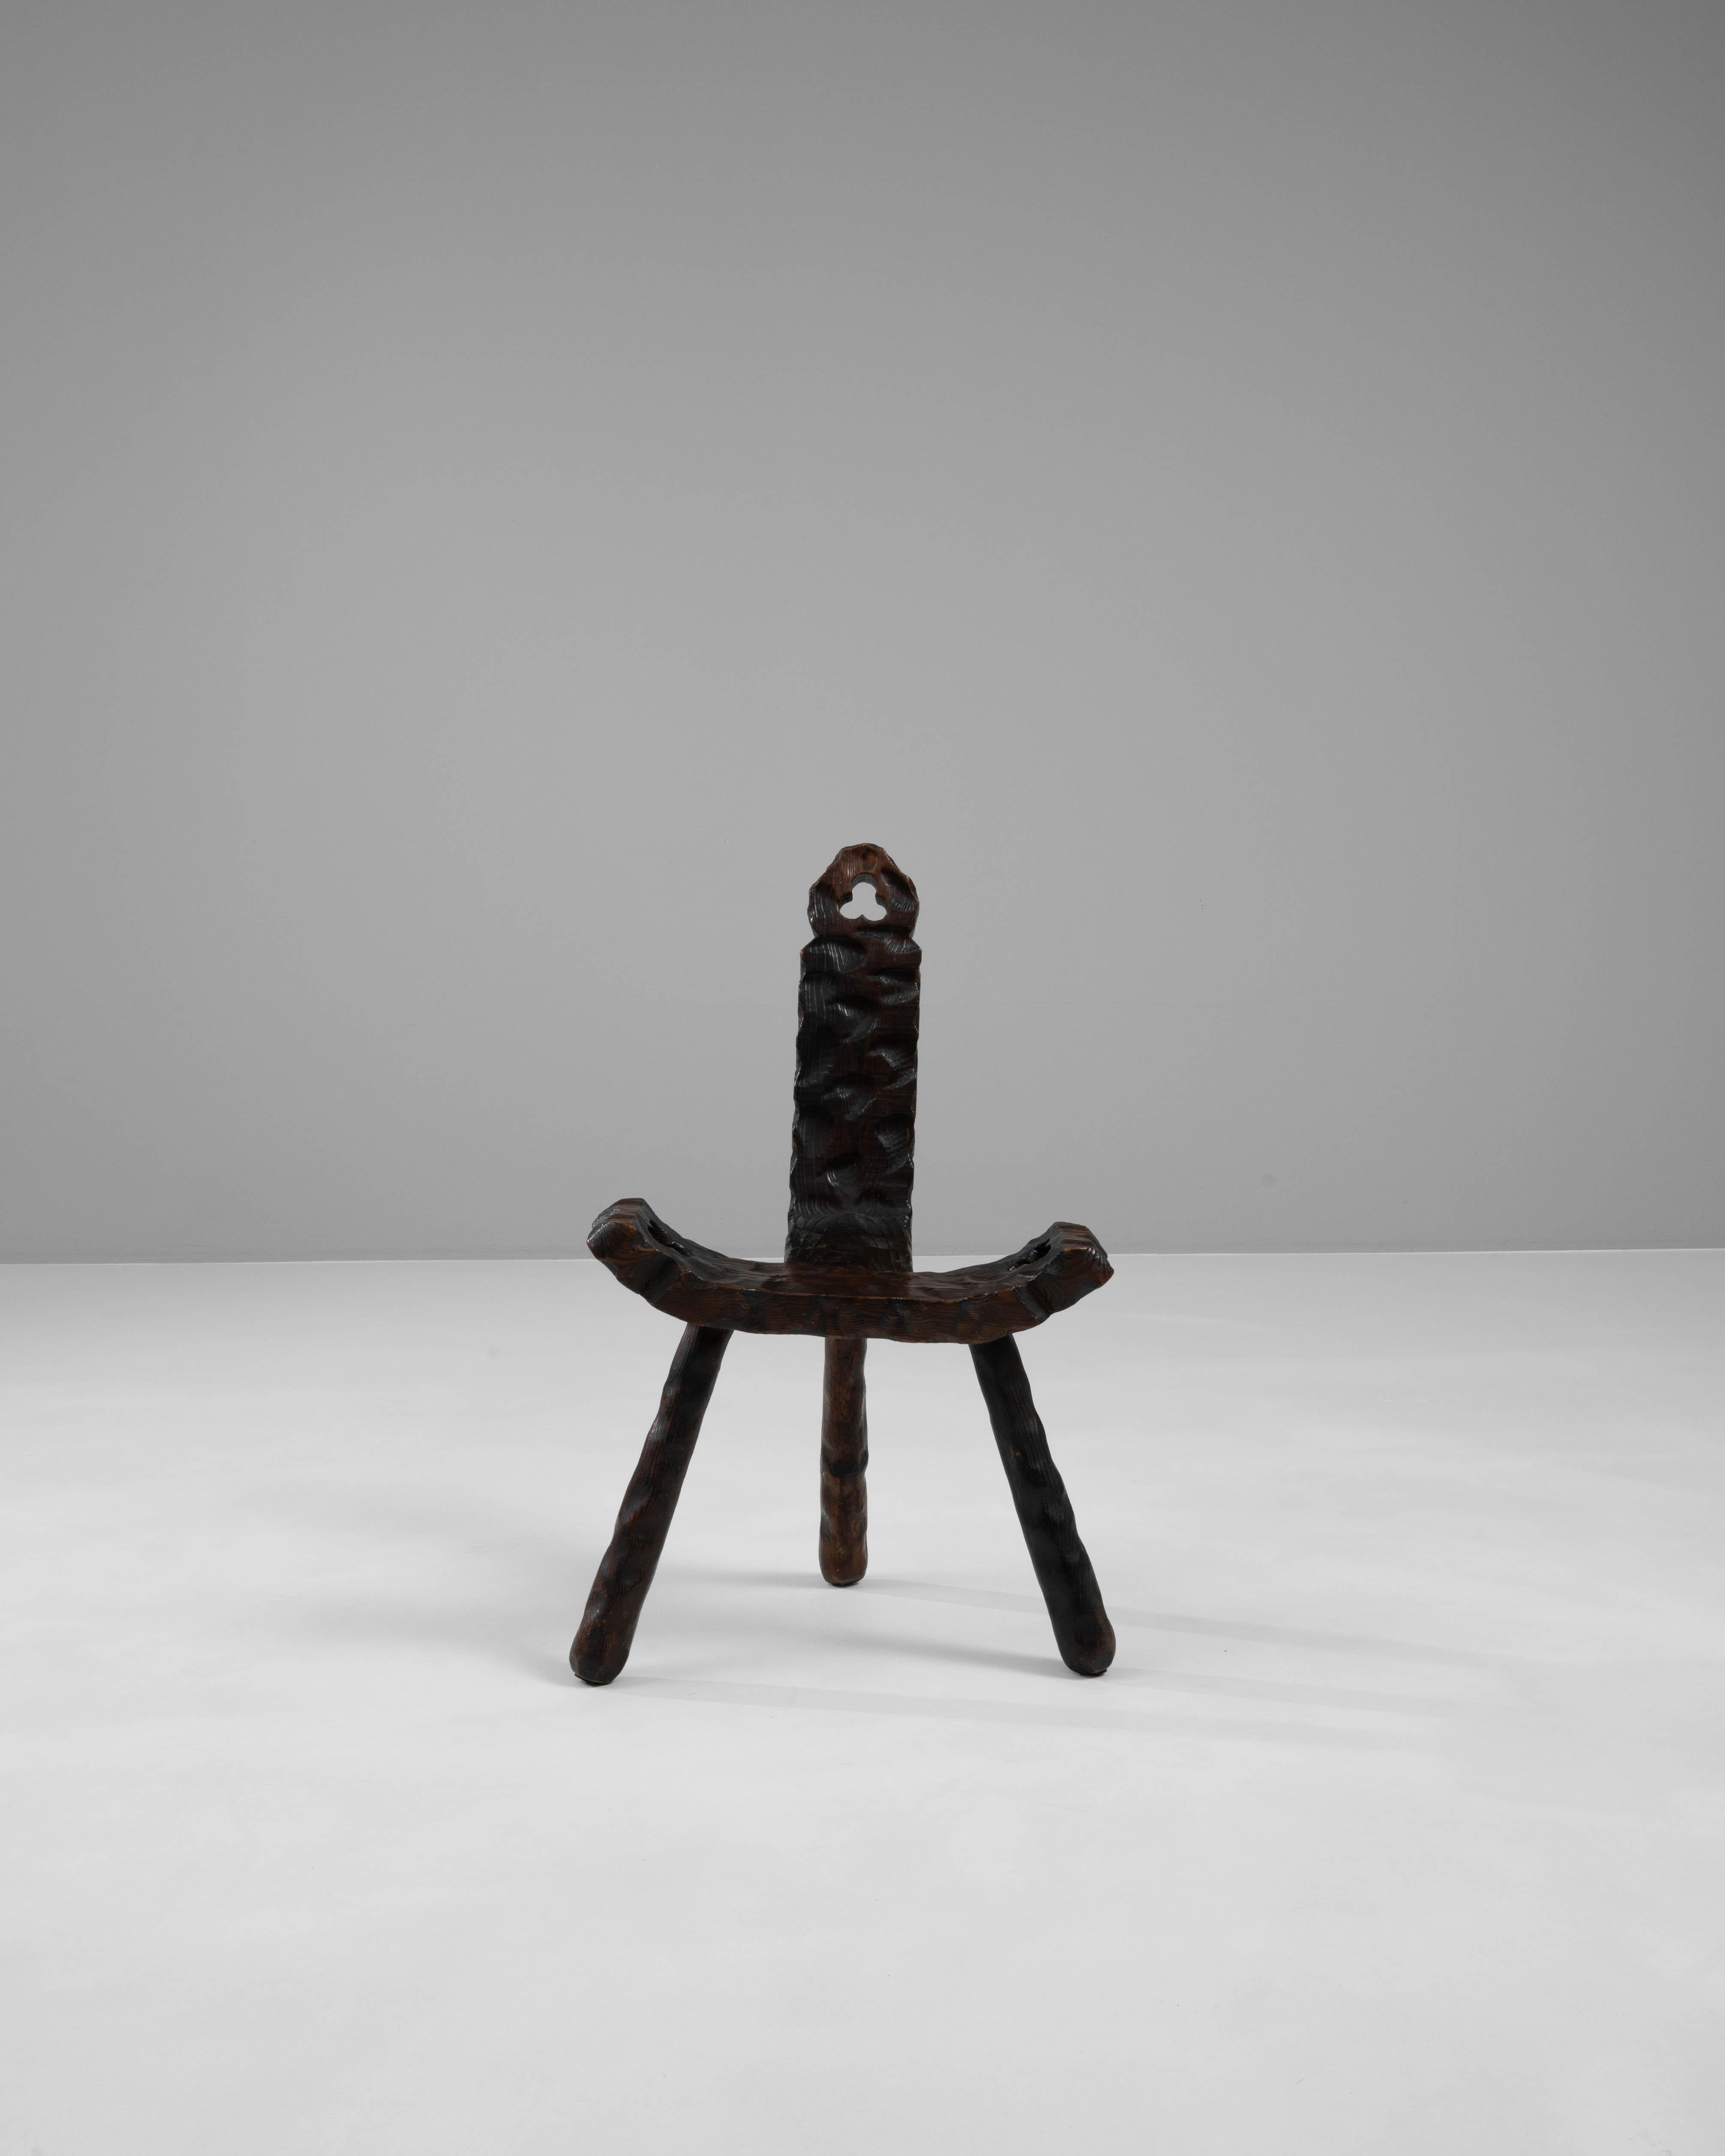 Unveil the artistry of this unique 20th Century Spanish Wooden Chair, where exceptional craftsmanship meets organic beauty. Sculpted from dark, rich wood, this chair stands out with its extraordinary, fluid design and intricate textures that mimic